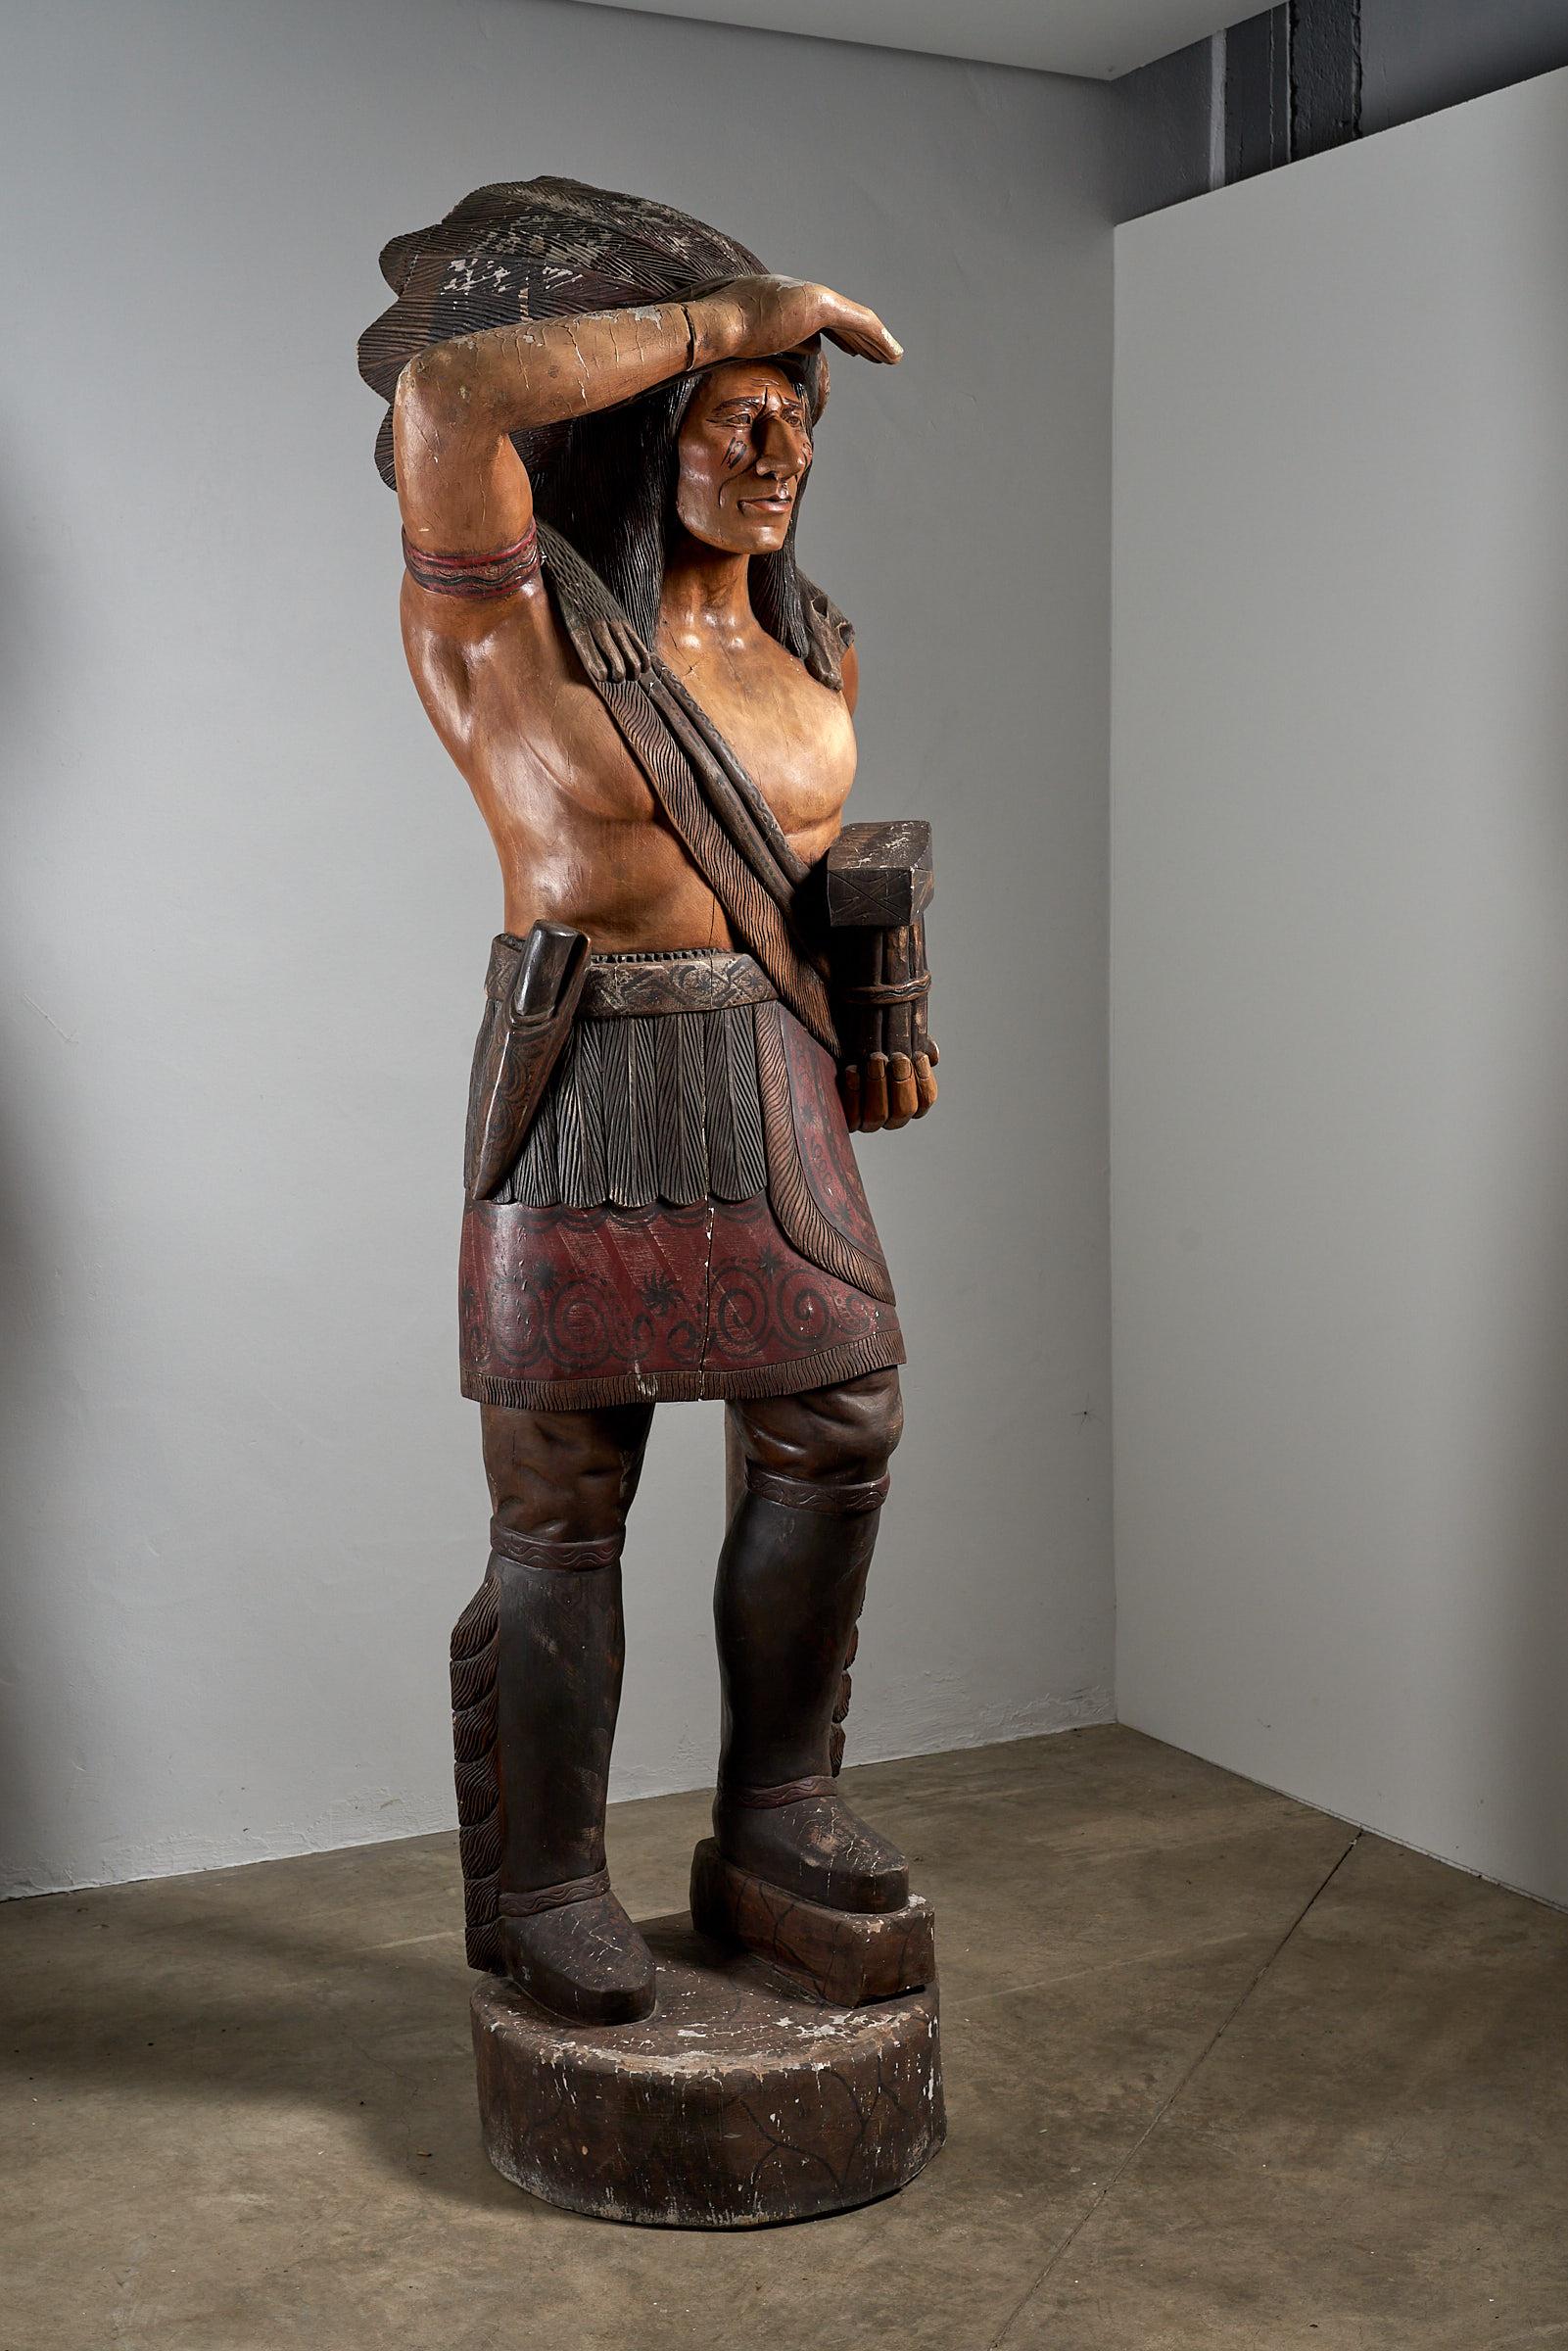 Imposing and Iconic: Large American Carved Cigar Store Indian Chief, Standing at 2.4 Meters Tall. This magnificent sculpture, historically used to promote tobacco, encapsulates the rich heritage of American craftsmanship. The intricate carvings